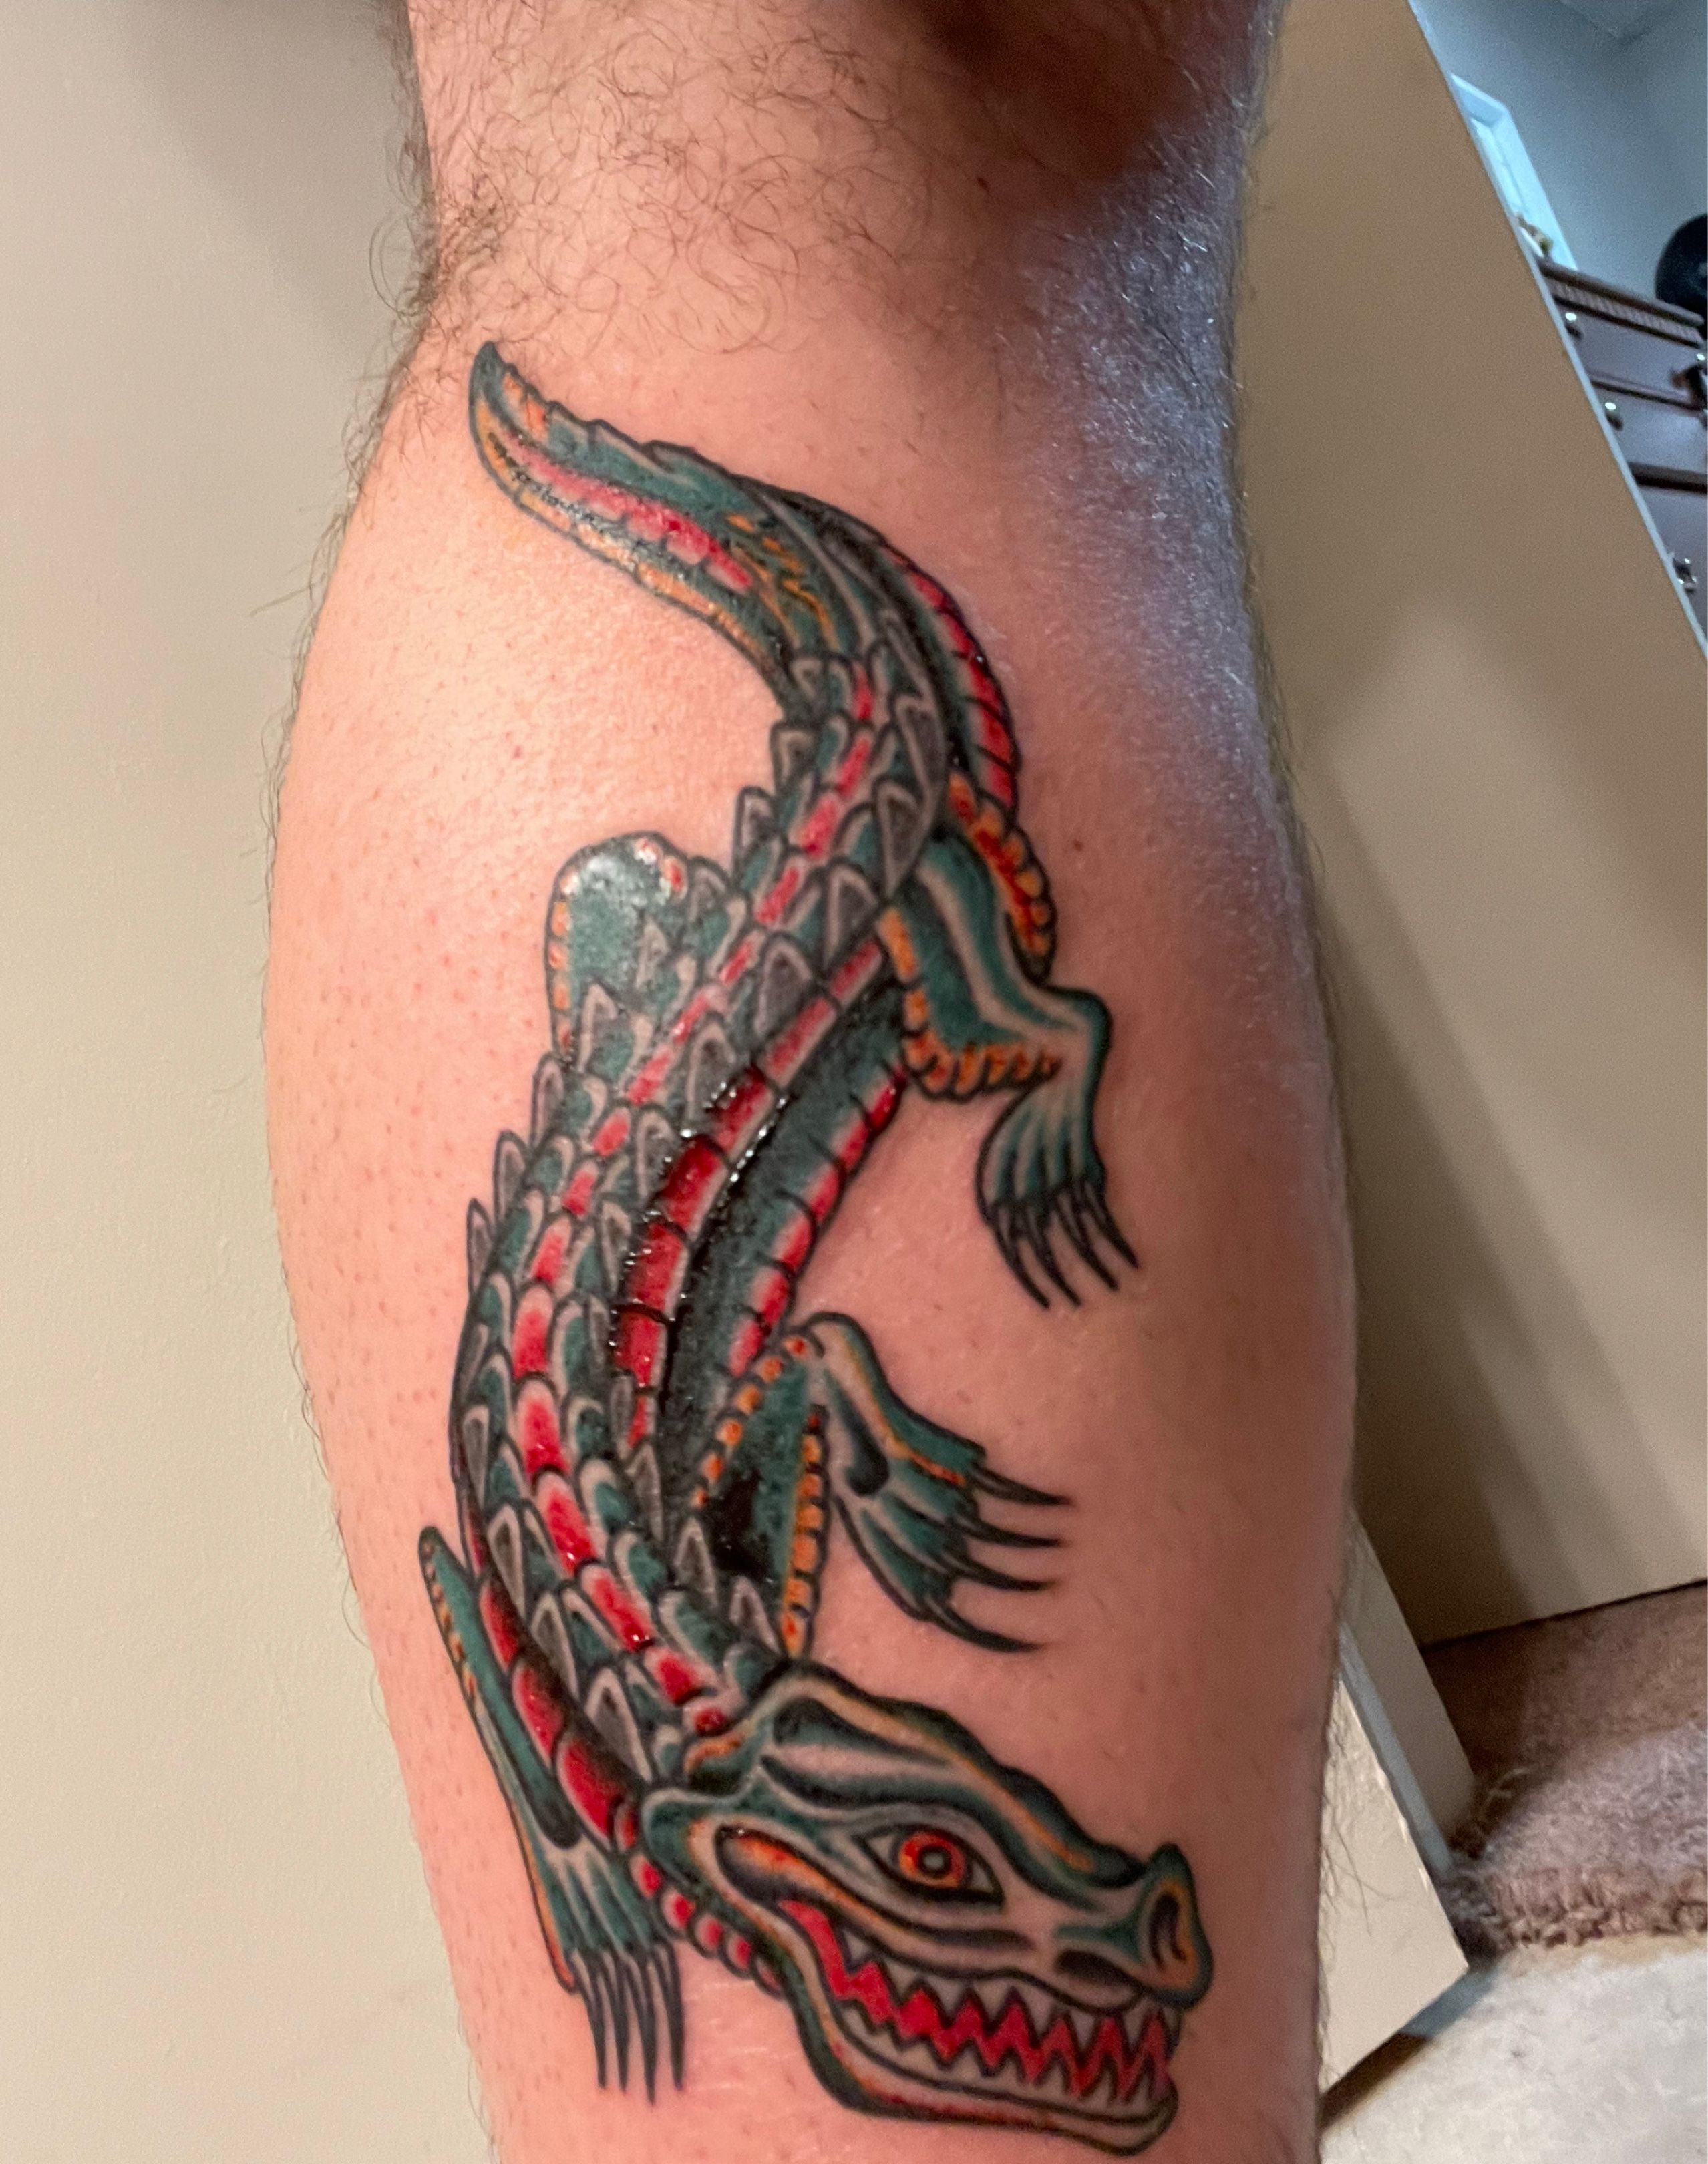 Steel and Ink Tattoo Studio  Traditional color Alligator tattoo Lets  draw something up for your next addition Bookyour appointments at  wwwsteelandinkstudiocom    traditionalart by artbybsitc alligator  tradart tradtattoos stlartists 